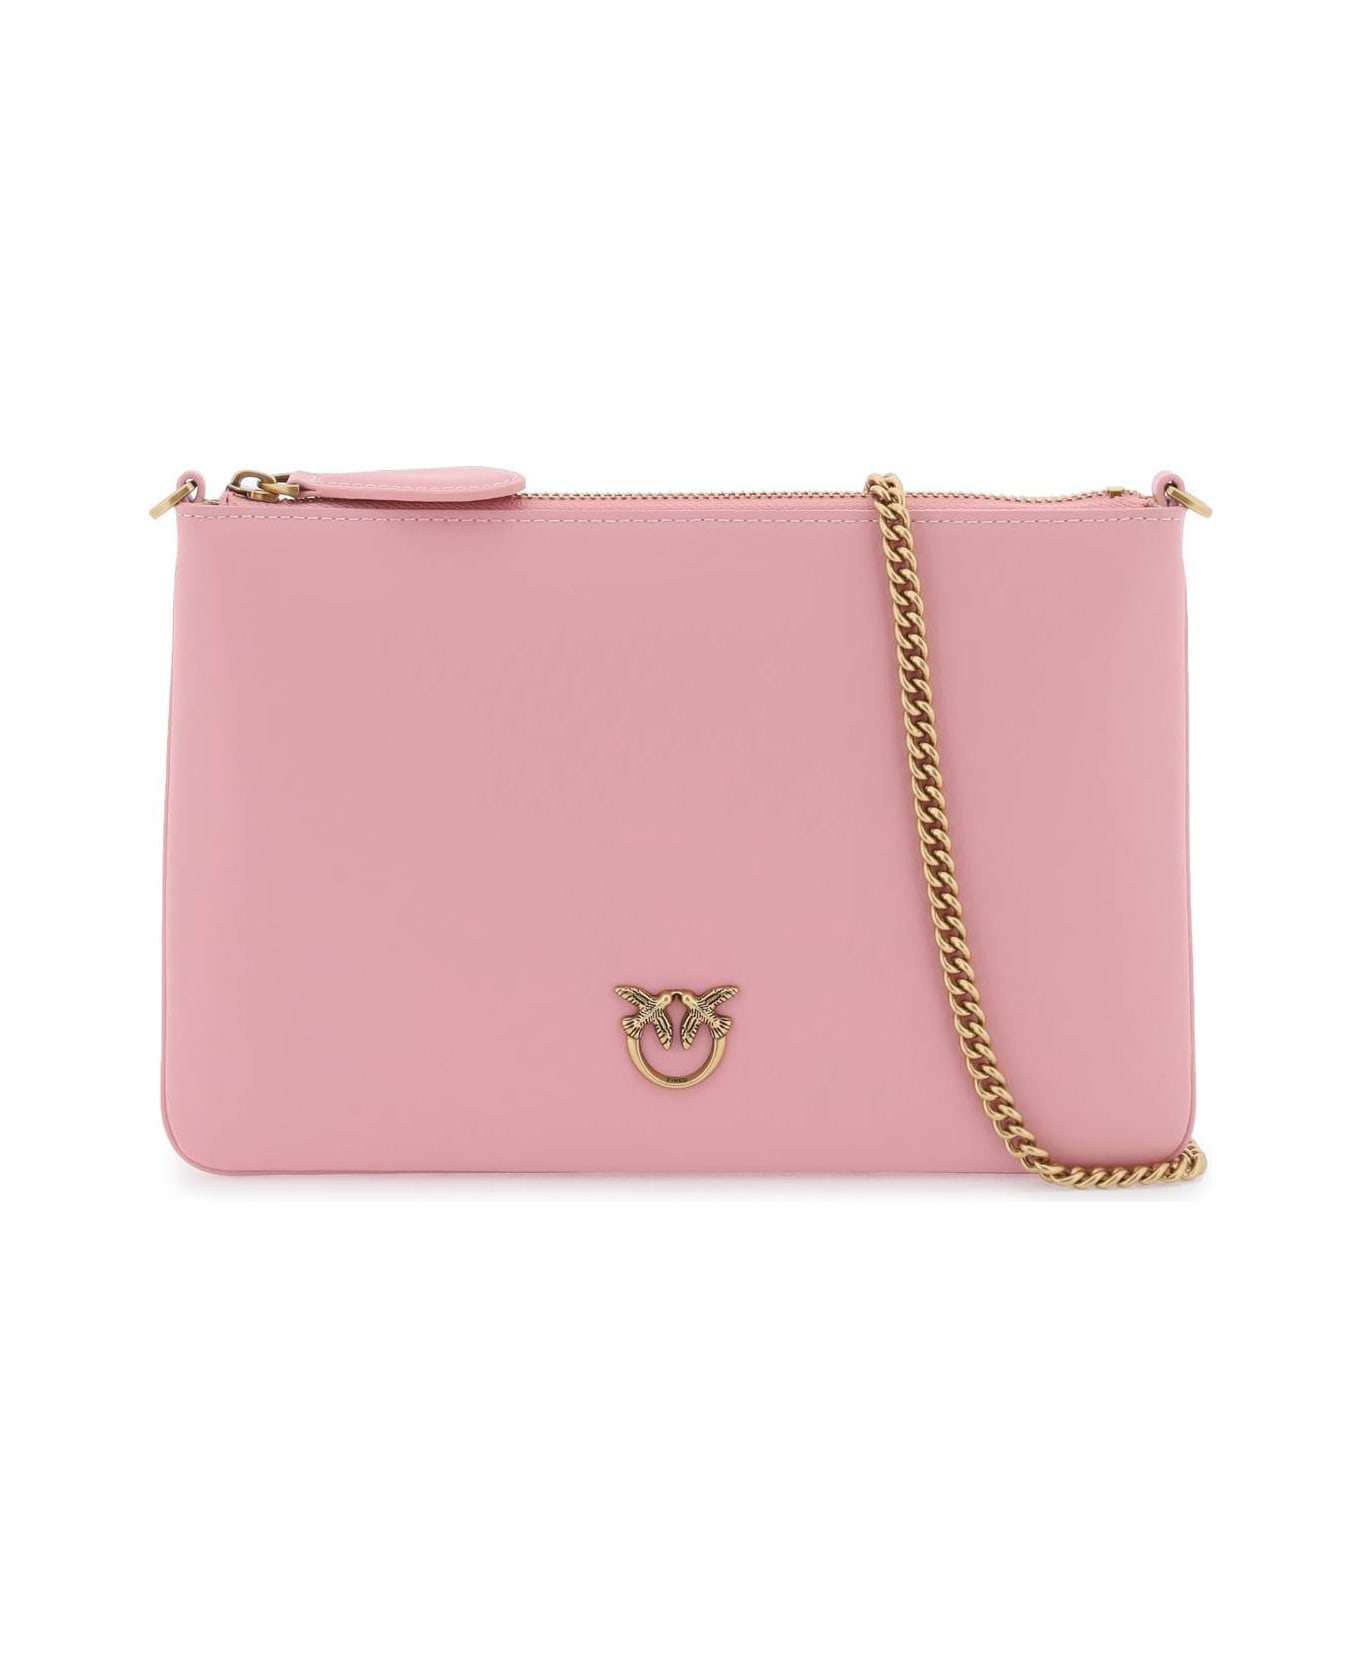 Pinko Pouch With Chain | italist